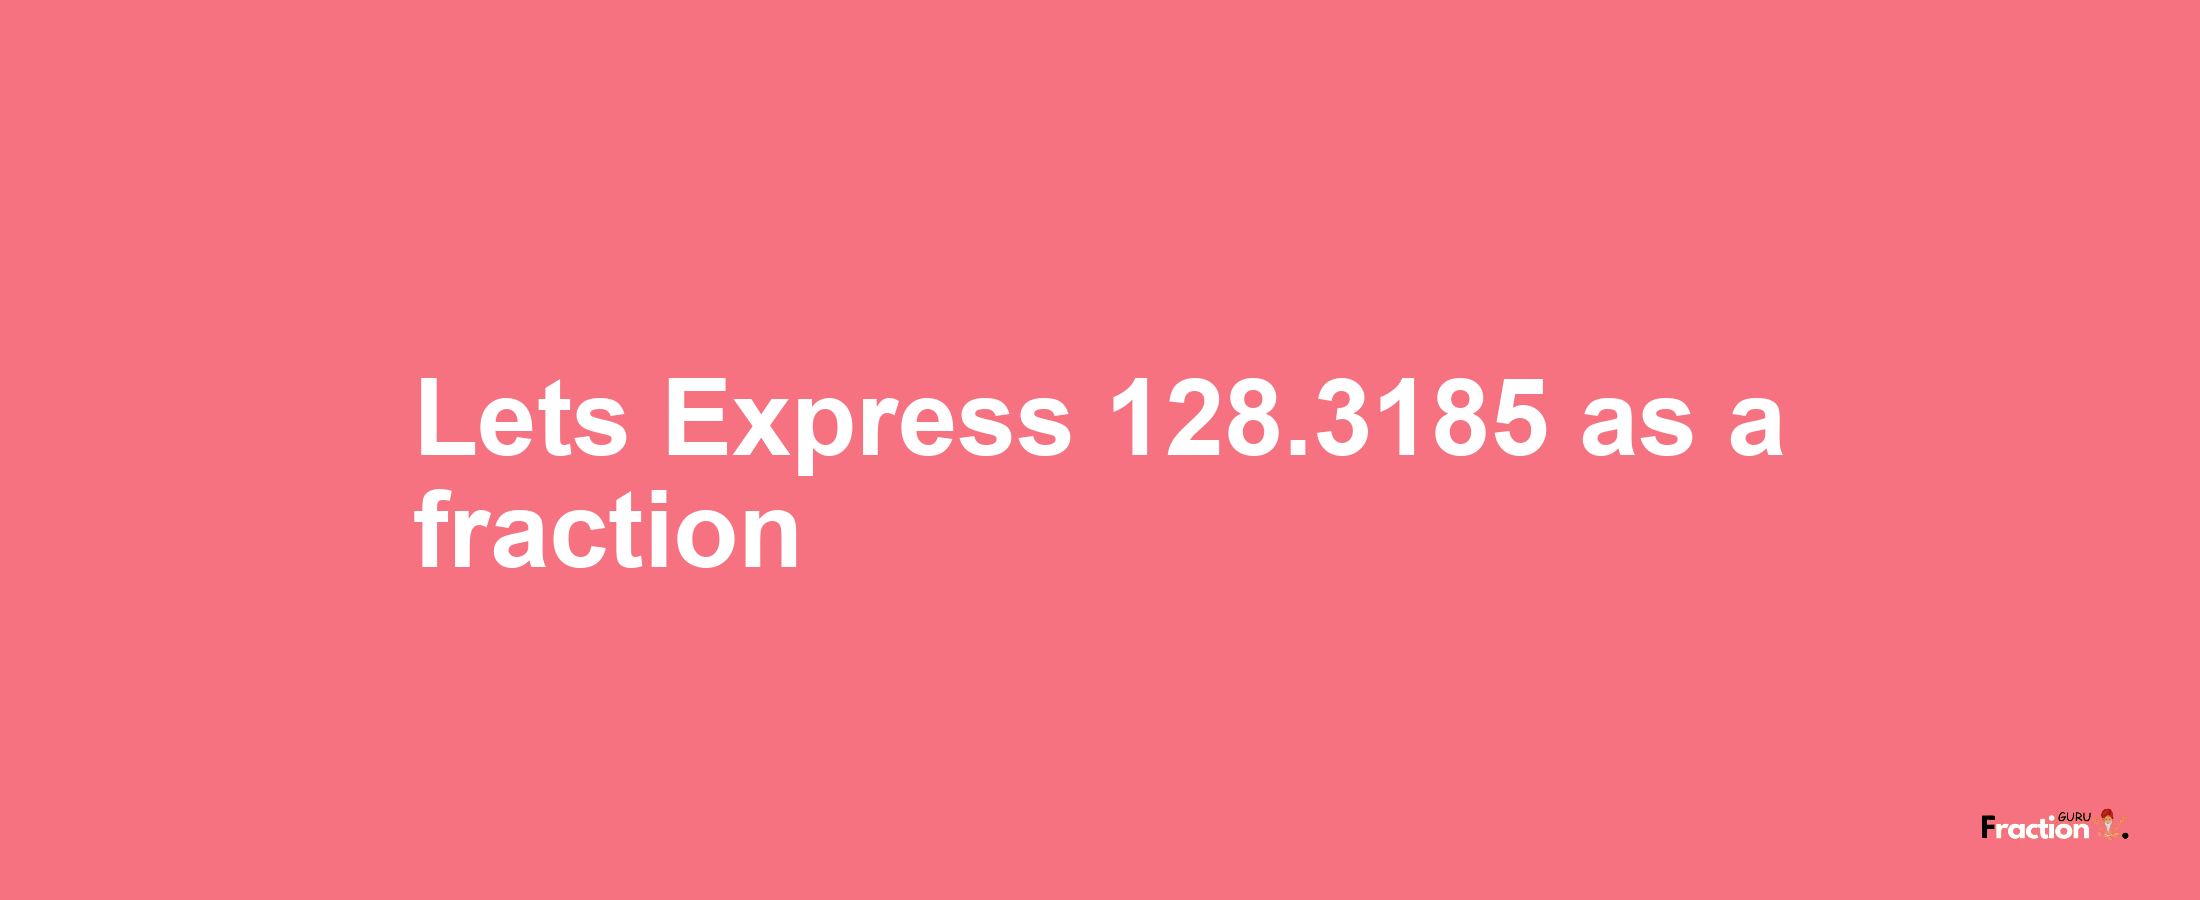 Lets Express 128.3185 as afraction